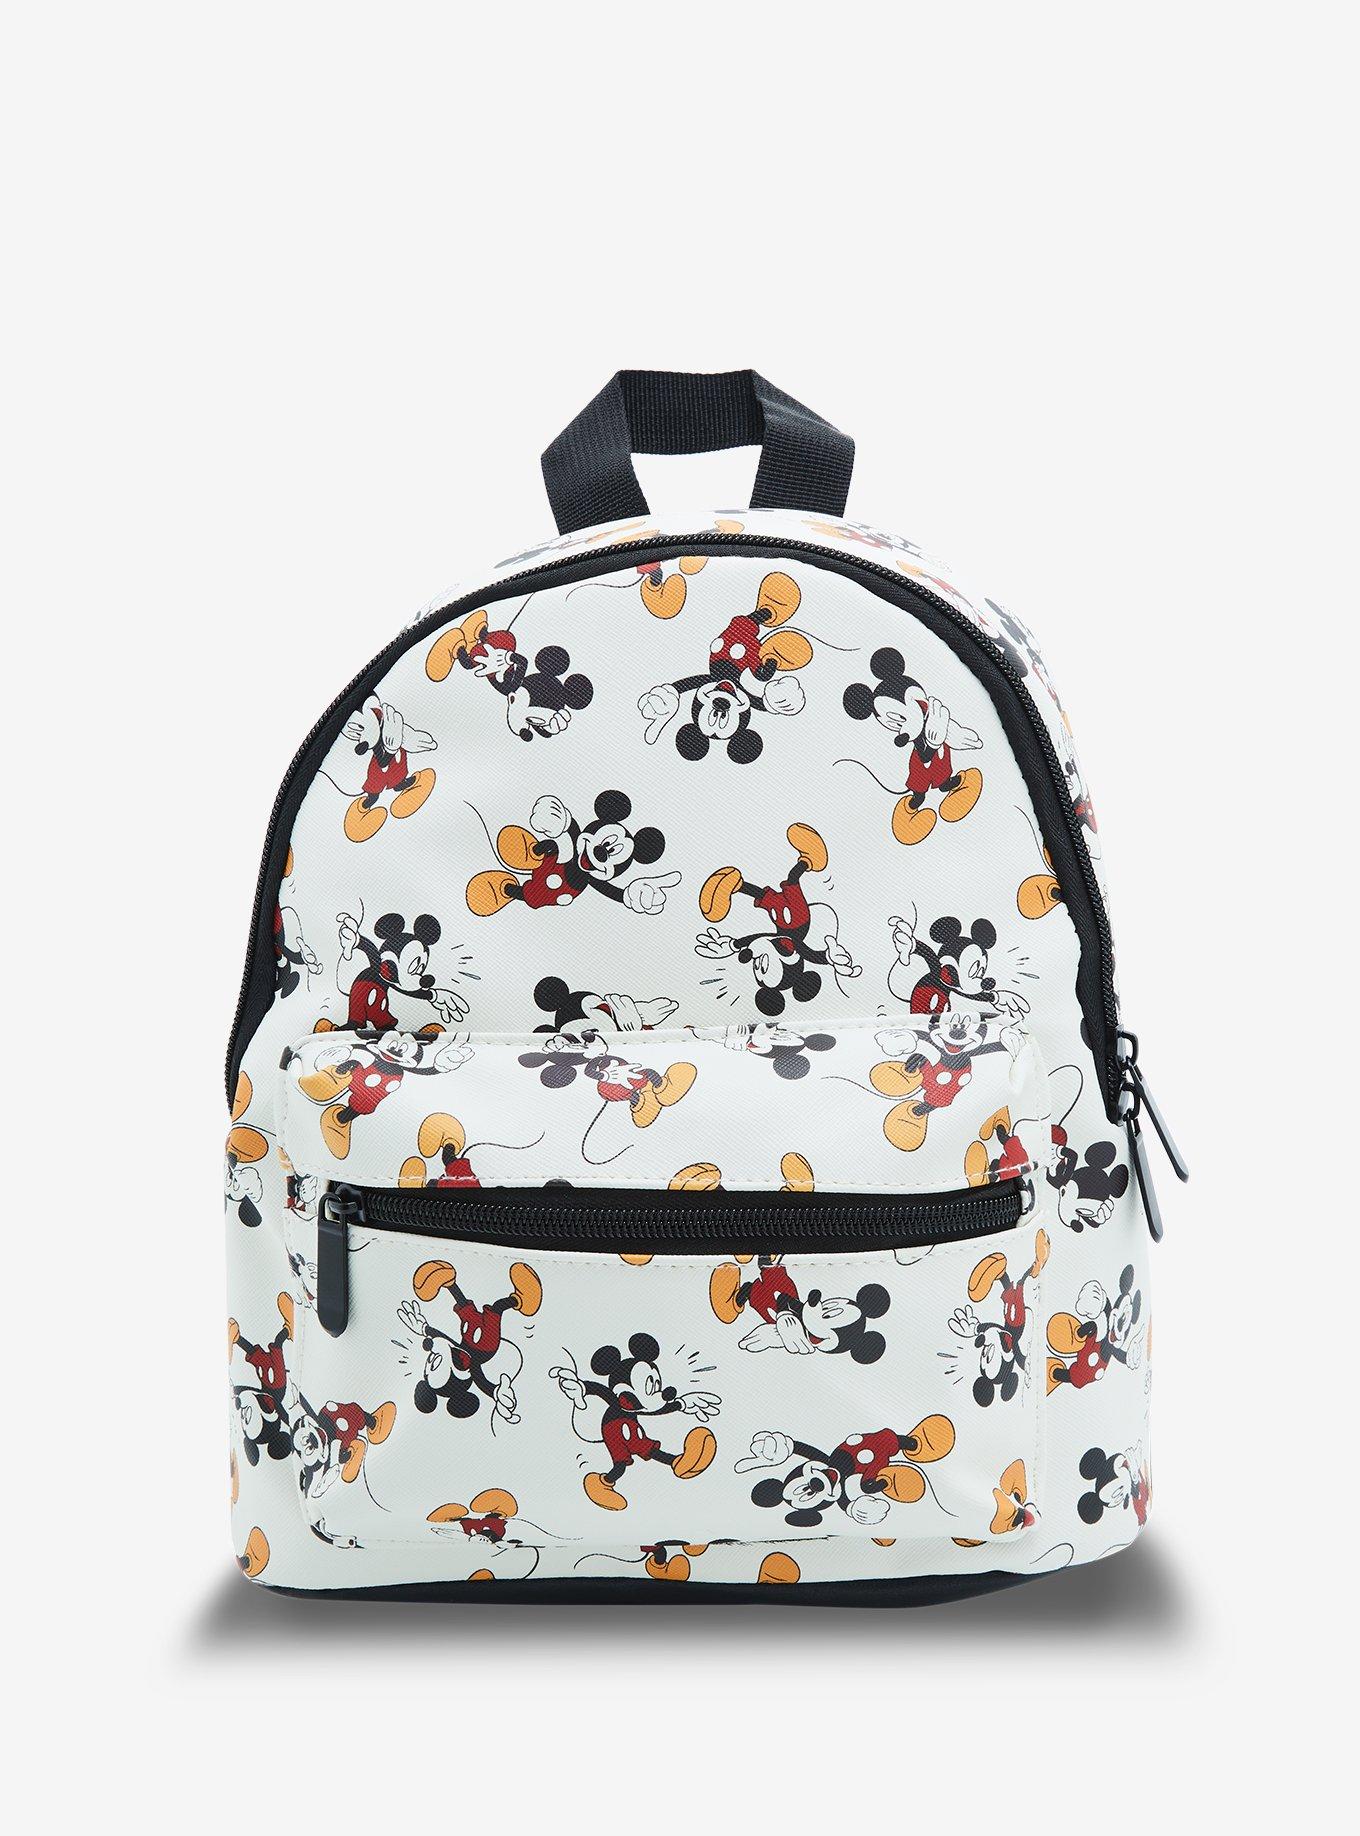 DLR - Disney Heritage Since 1928 - Forever Mickey Patch Backpack